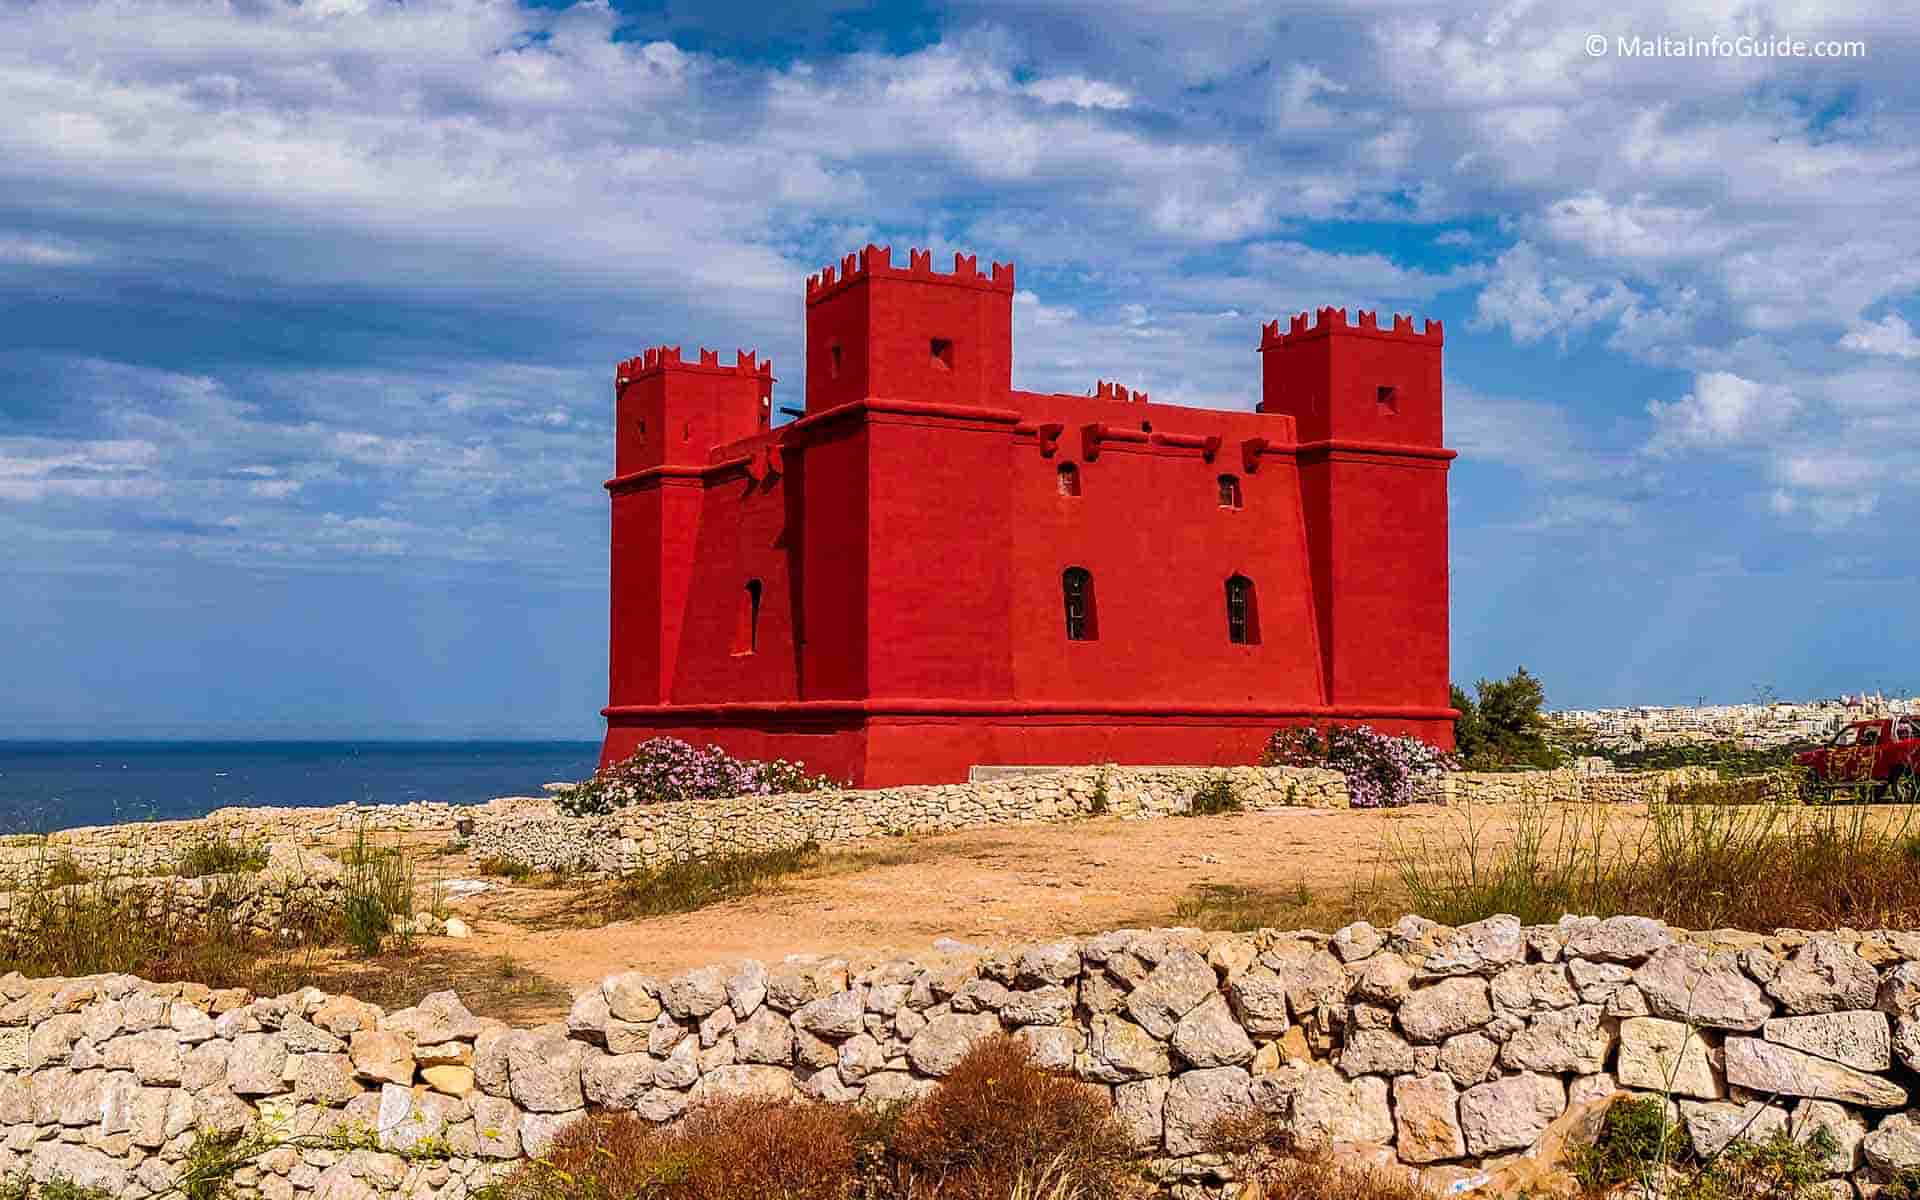 The famous Red Tower in Mellieha